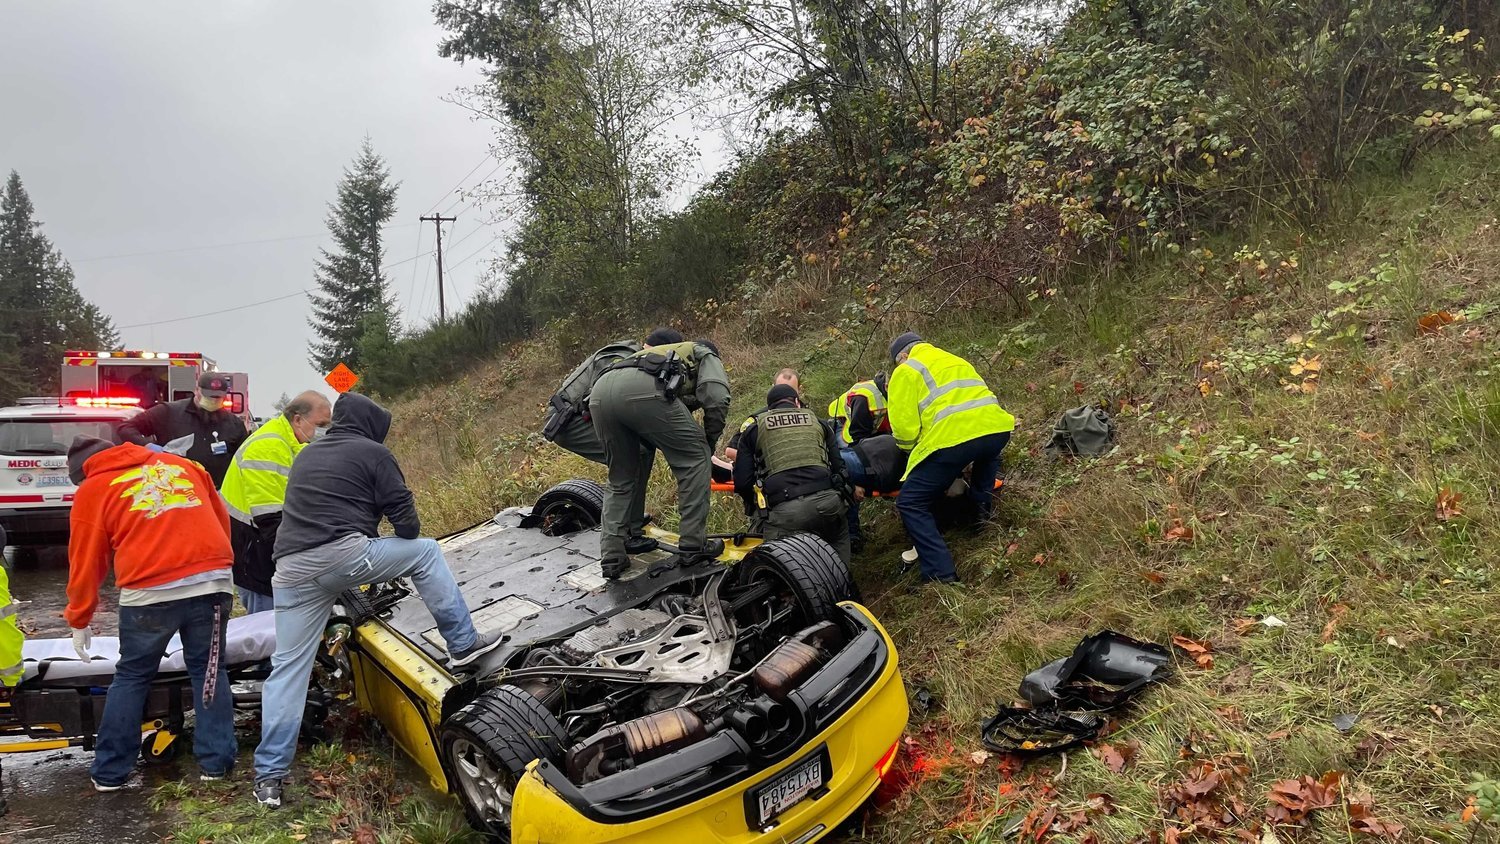 Emergency responders and passersby assist at the scene of a crash on U.S. Highway 12 near Salkum in November. Sheriff Rob Snaza and Lewis County Commissioner Sean Swope were among those to help after the crash, which was not fatal.